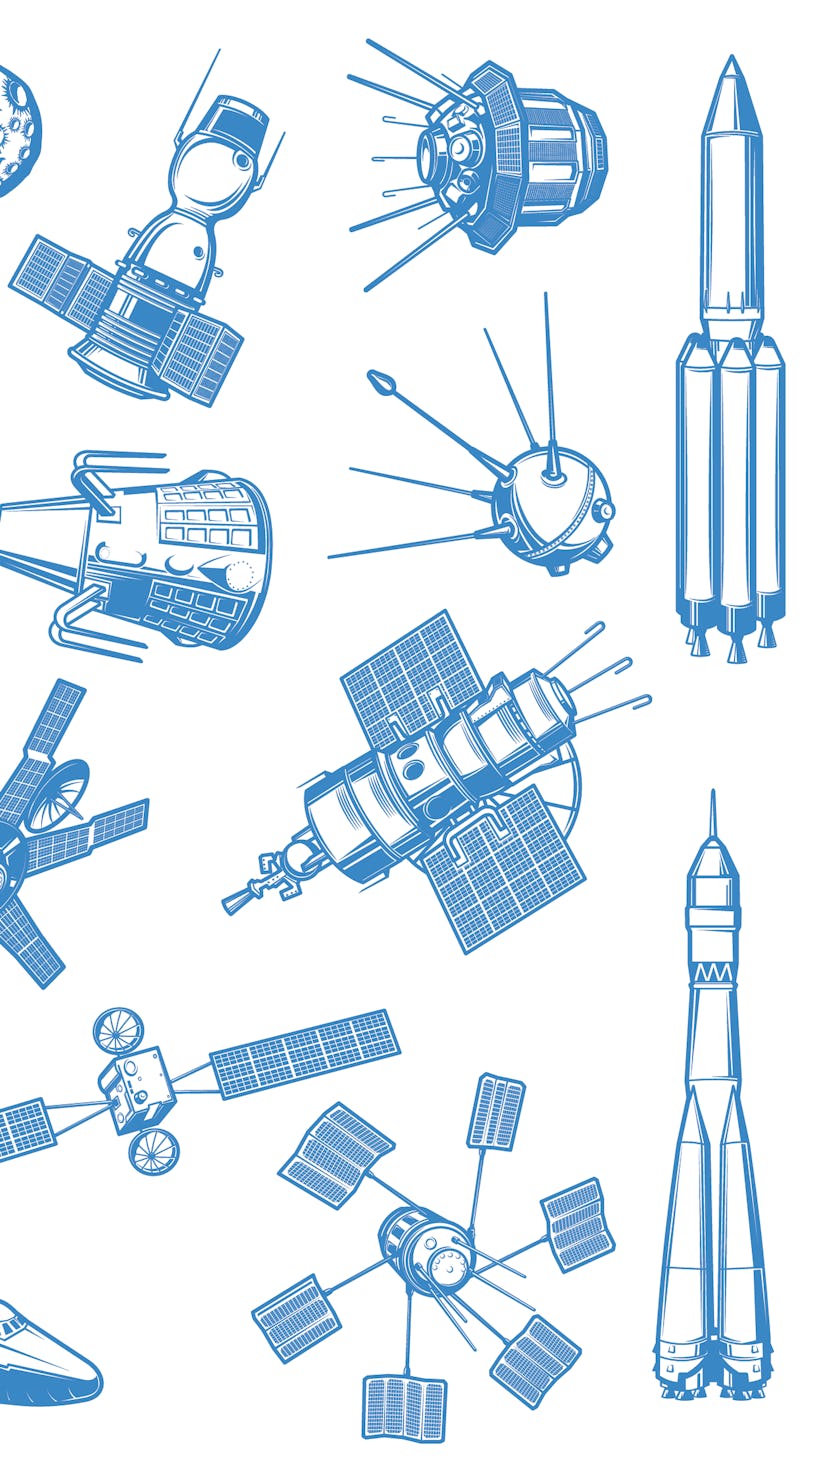 Space exploration, galaxy research spacecraft and satellites icons set. Astronaut in spacesuit, arti...